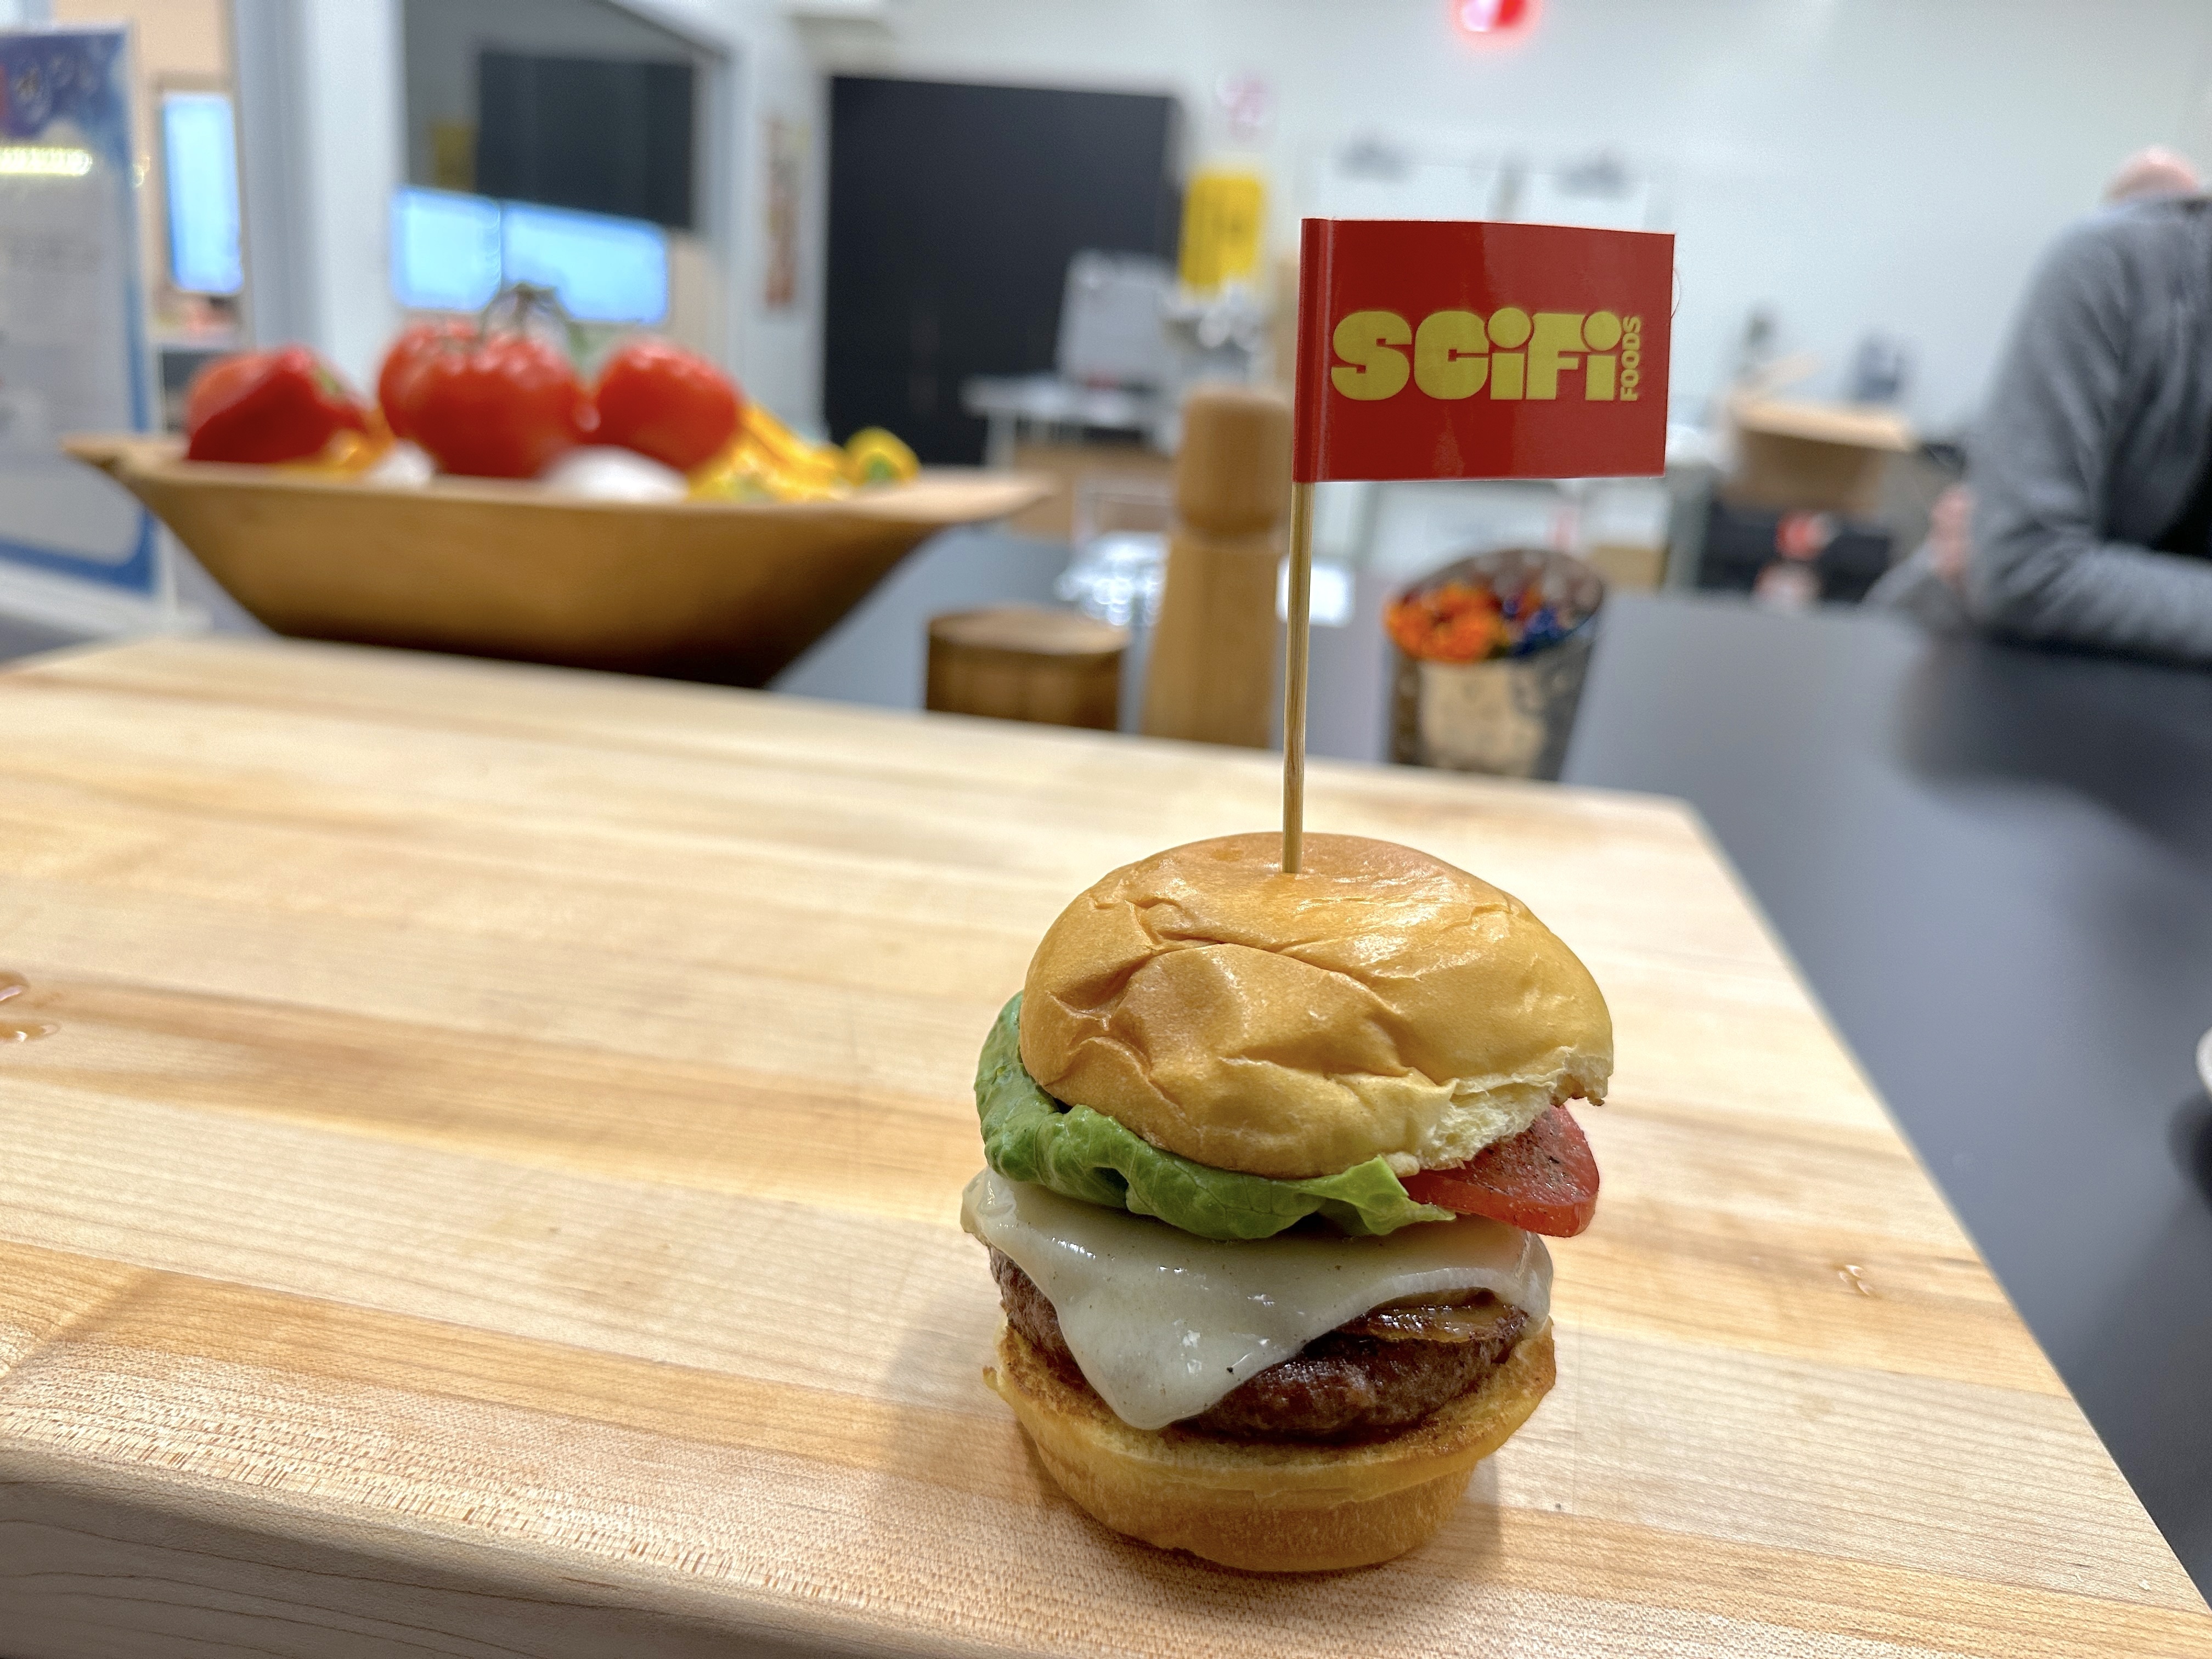 A hamburger with a lab-grown meat patty, along with cheese, lettuce, and tomato, sits on a wooden cutting board. A toothpick with a small red flag affixed to it sticks out of the top burger bun; the flag reads, “SCiFi” in yellow letters.